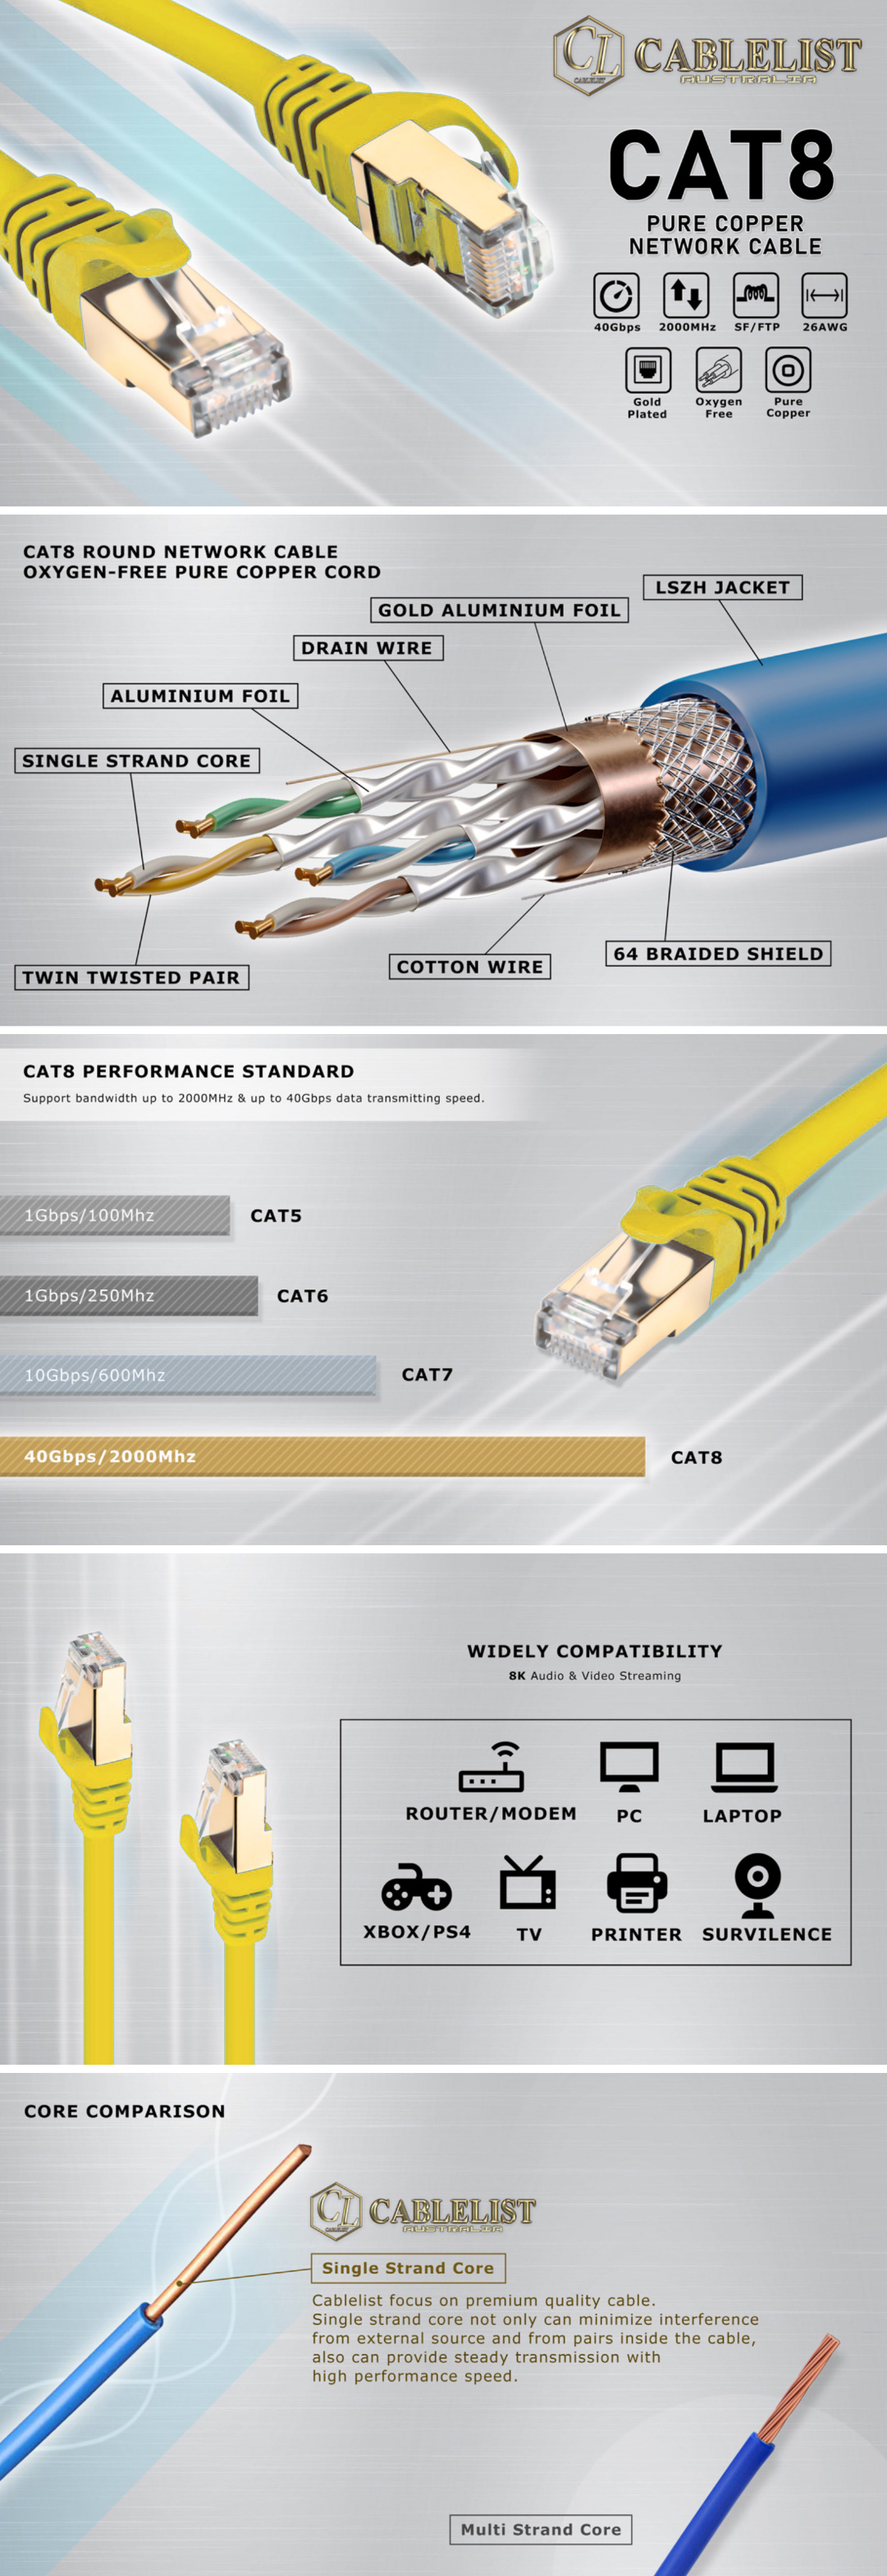 Network-Cables-Cablelist-CAT8-SF-FTP-RJ45-Ethernet-Cable-2m-Yellow-2